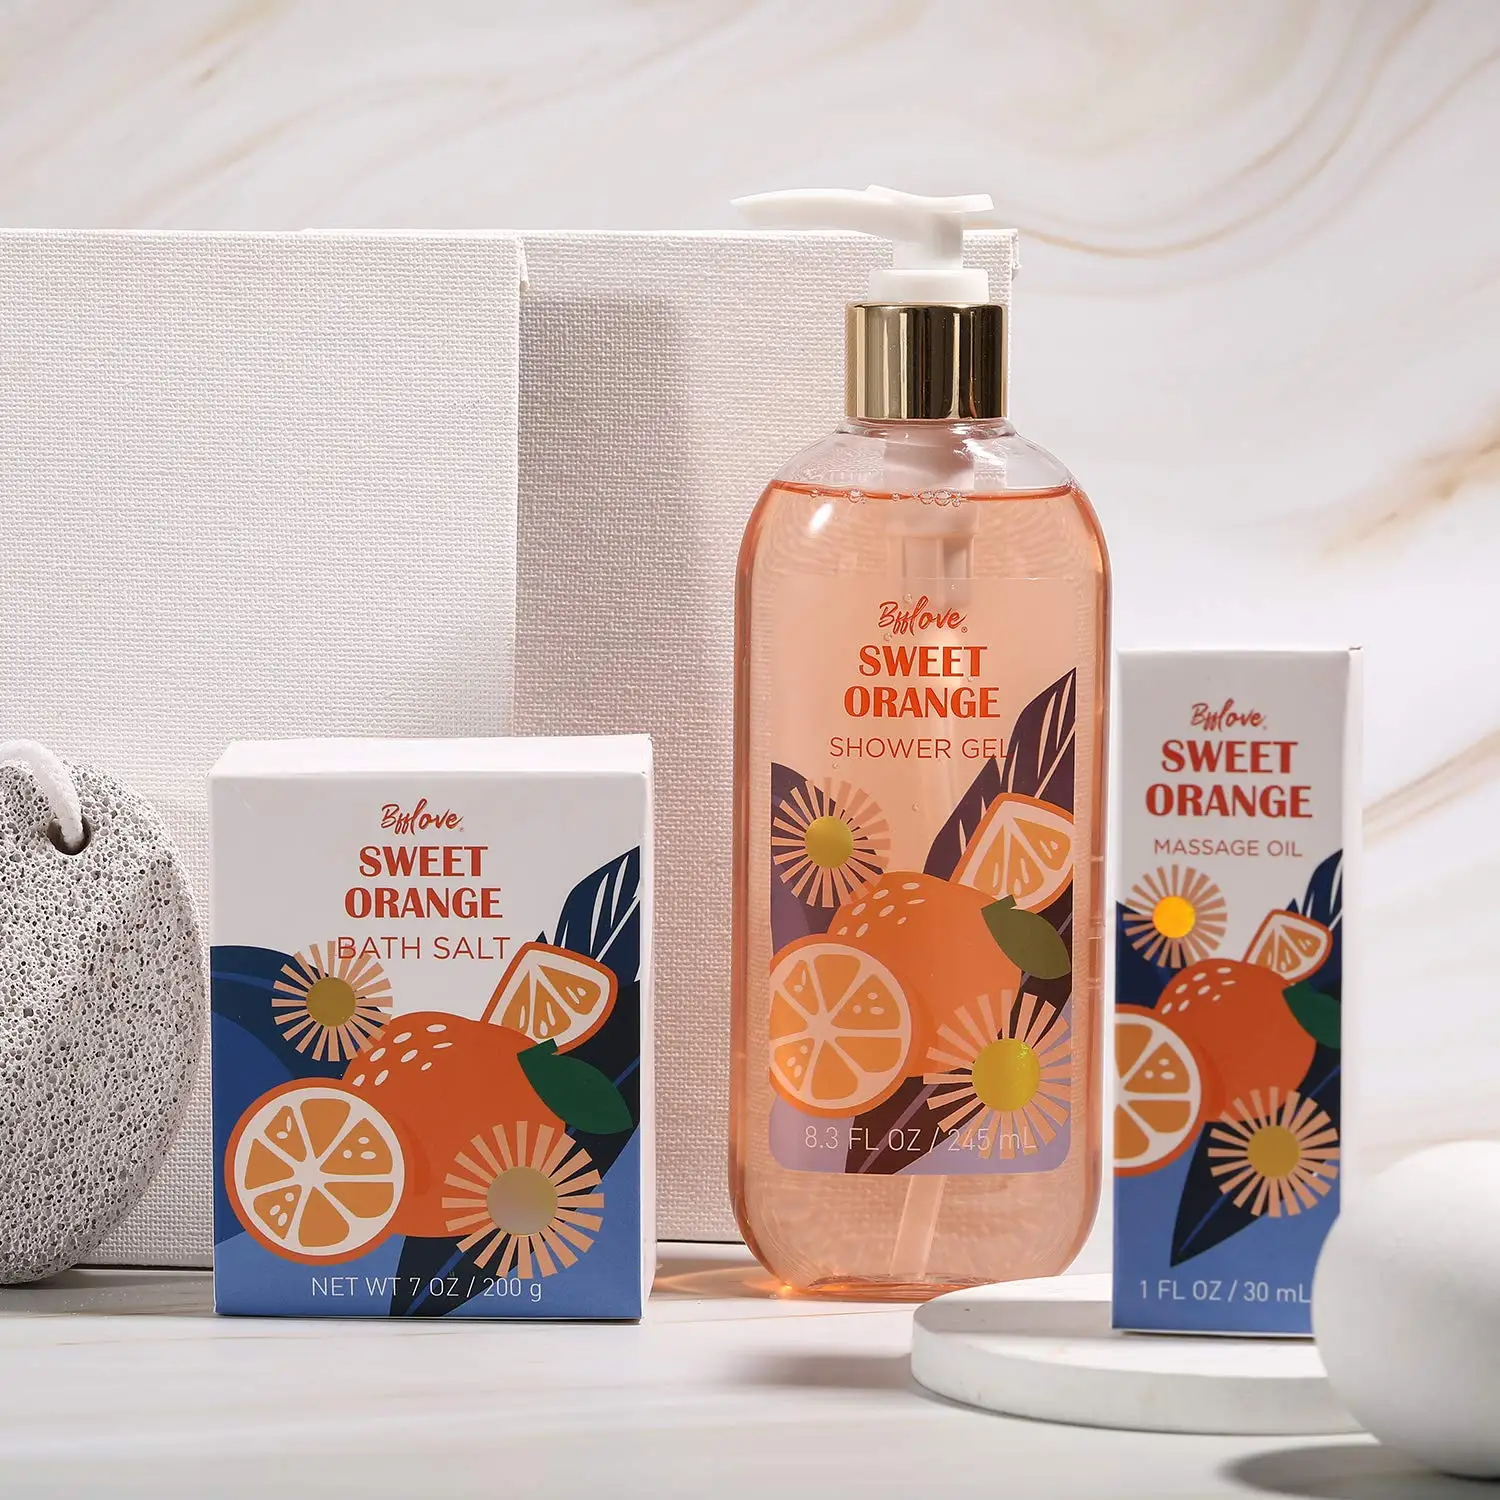 Sweet Orange Spa Gift Basket, Luxury 10pcs Bath & Body Gift Set for Women, with Foot Pumices Stone, Massage Oil 5